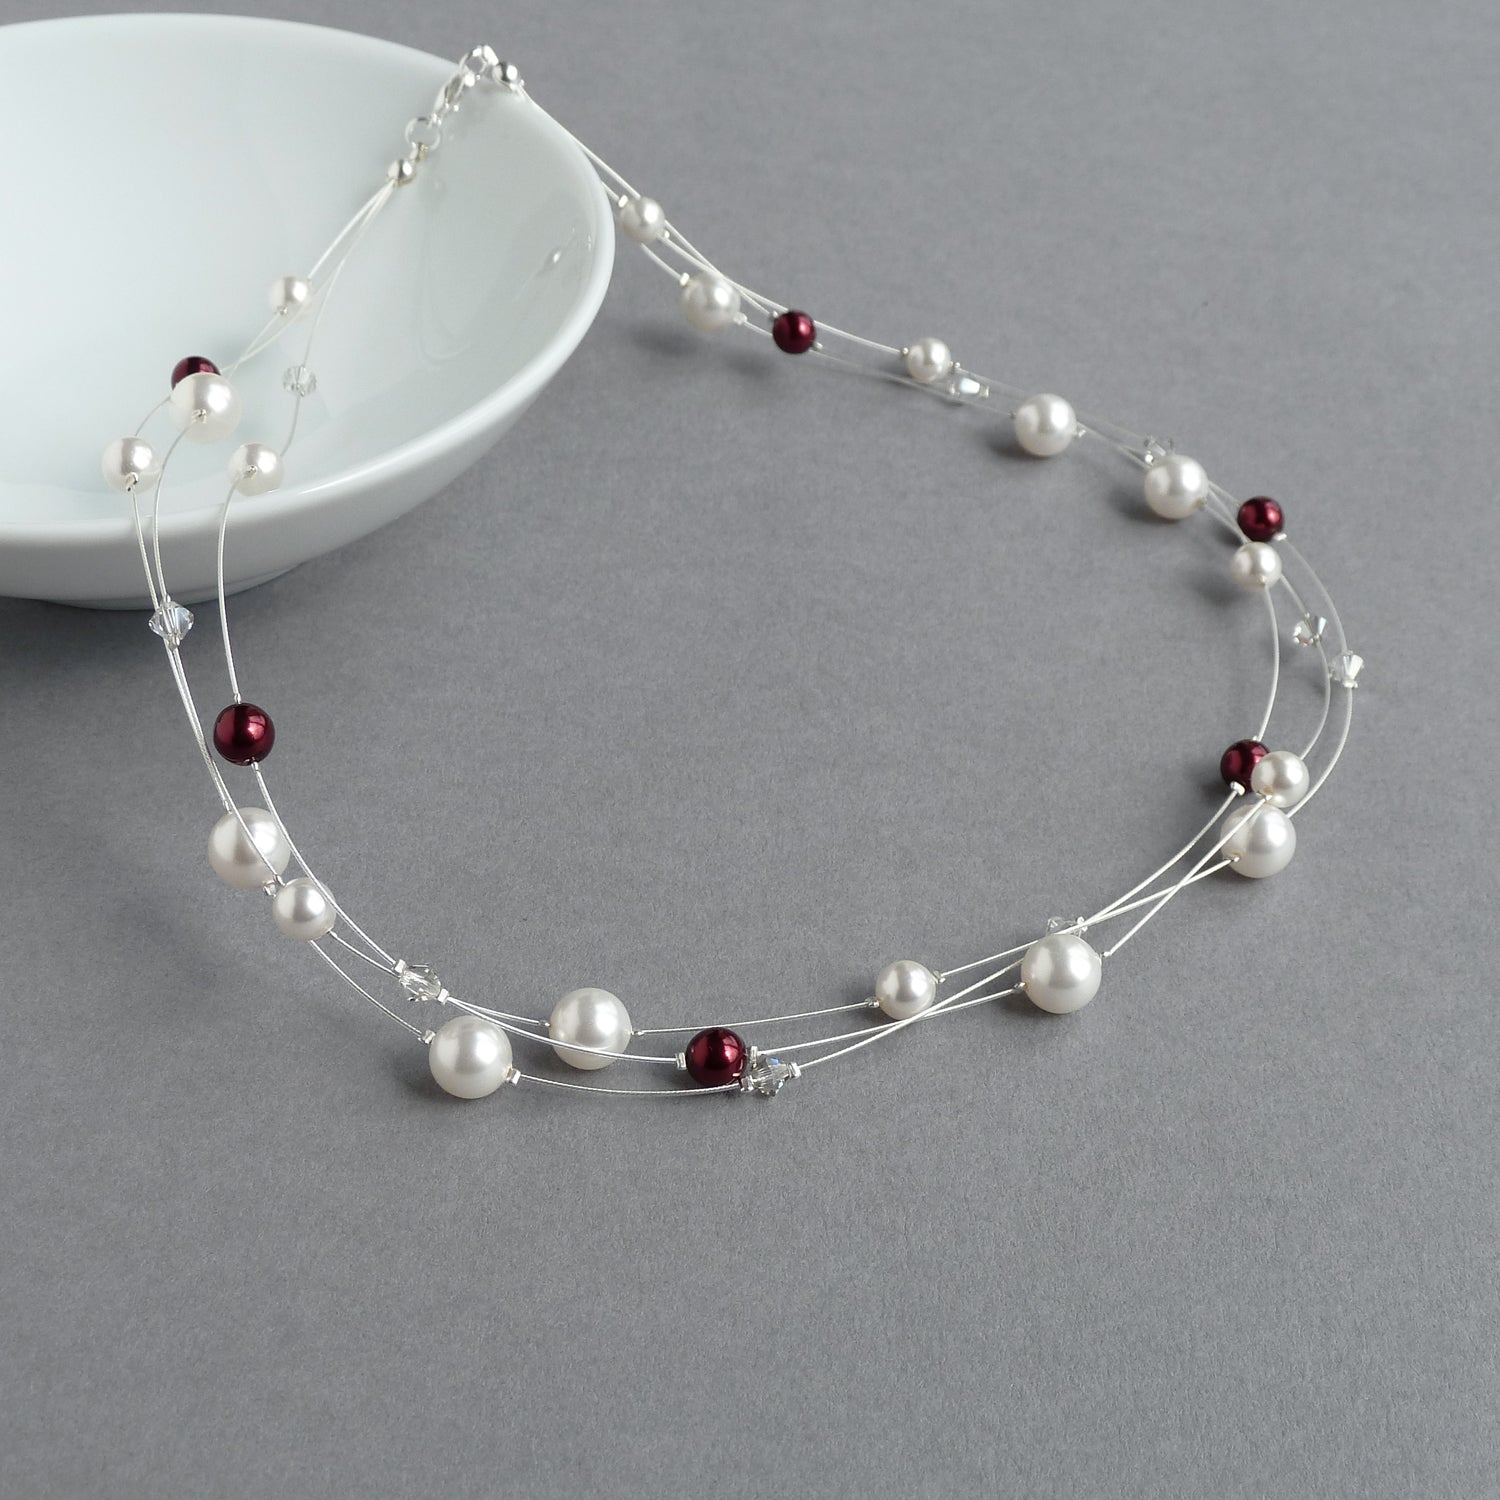 White and burgundy multi-strand necklace